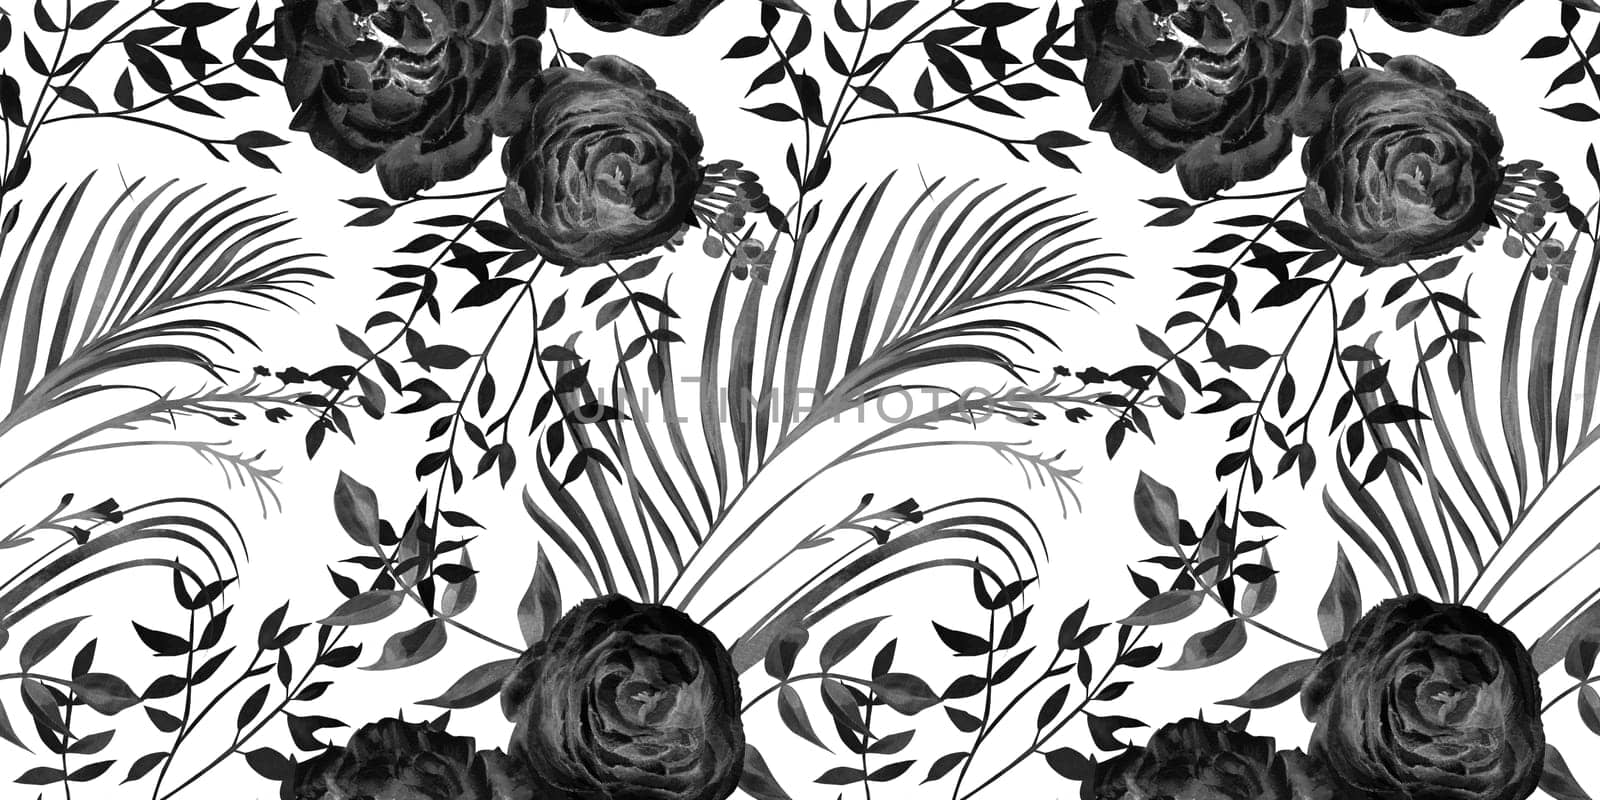 Black and white monochrome pattern with roses and branches for textile